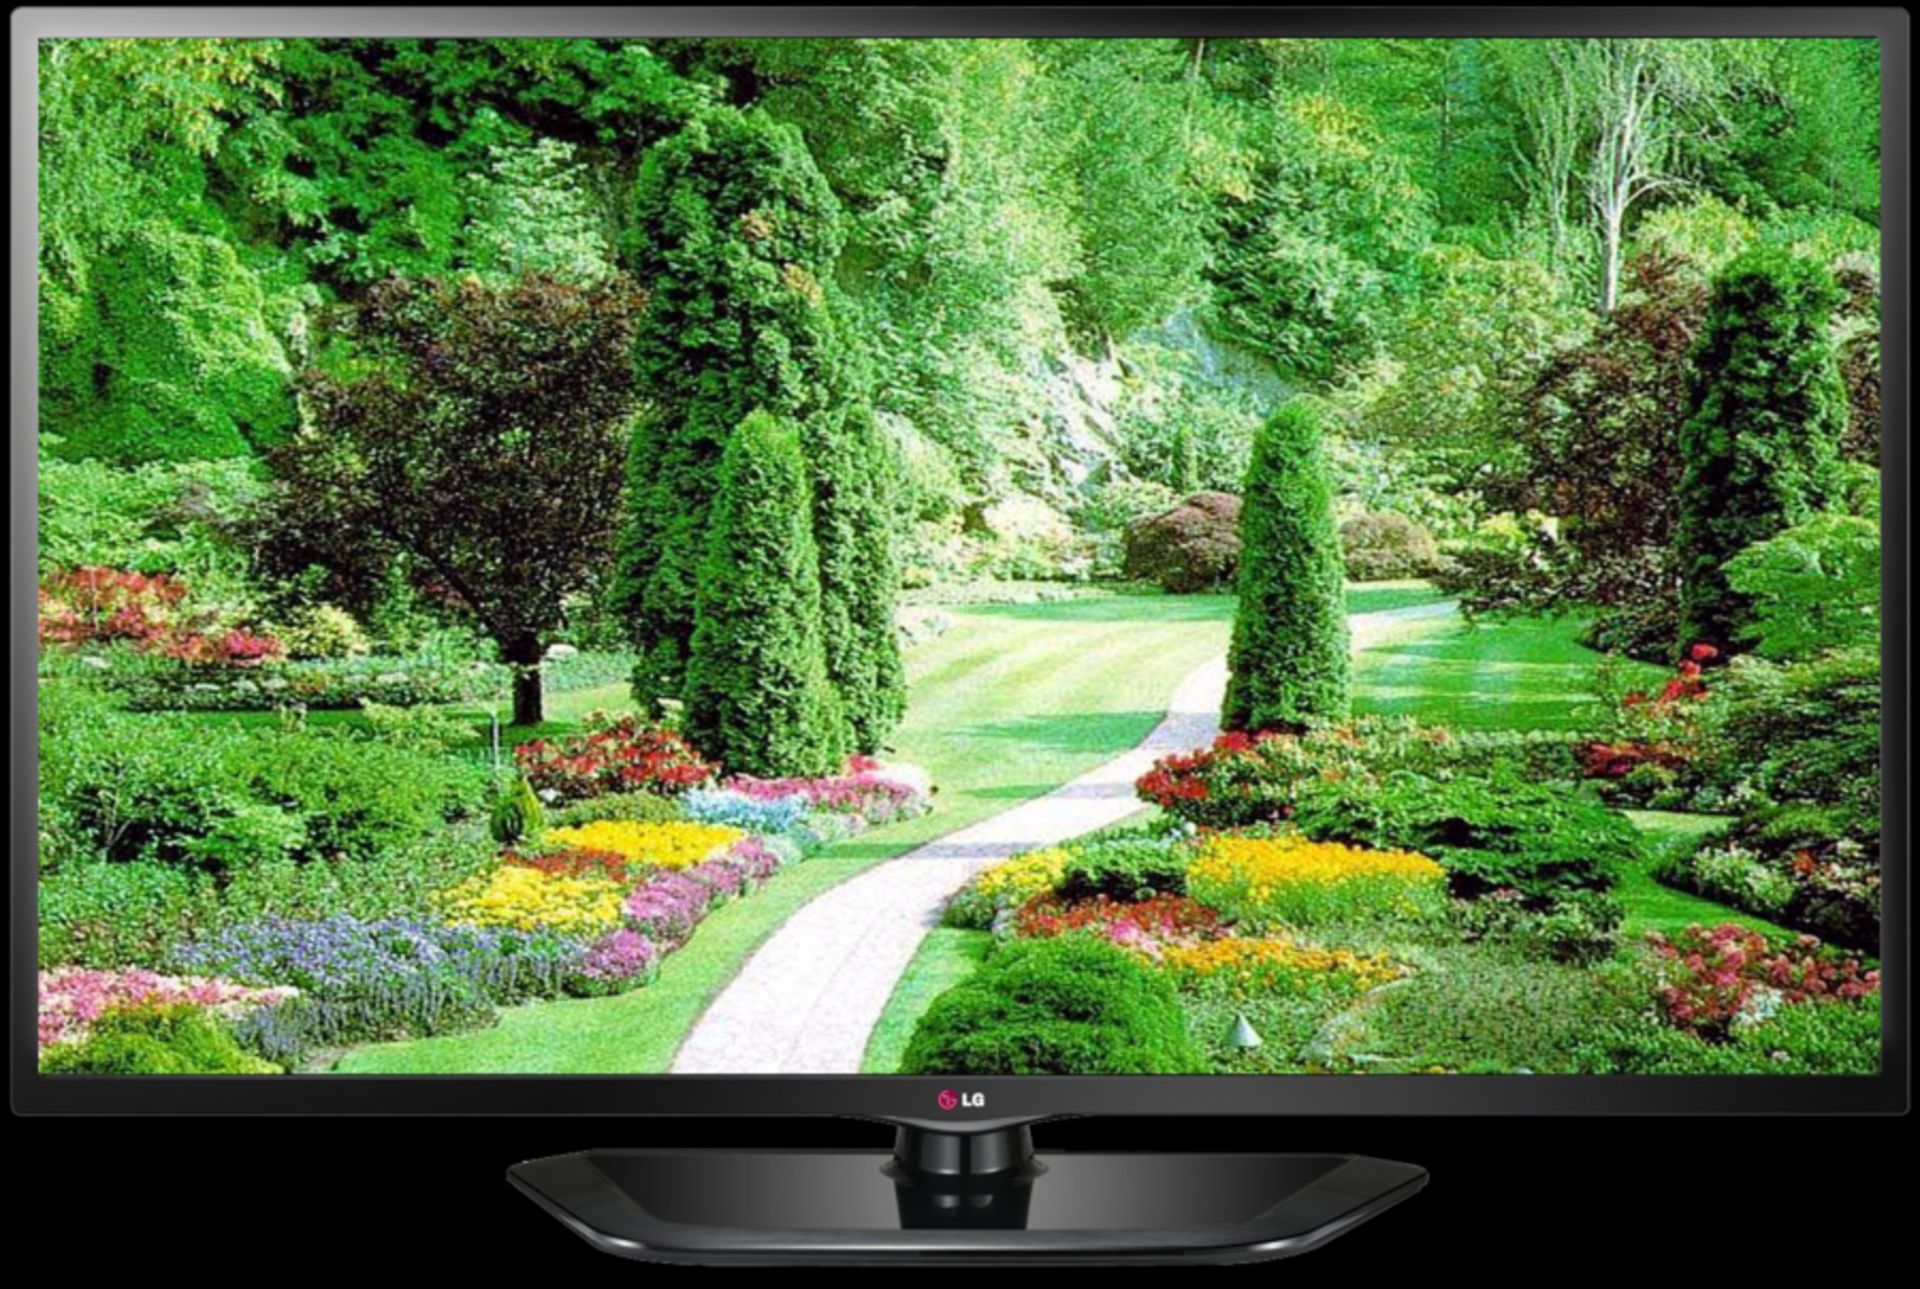 V Grade A 32LN5400 LG 32" Full HD LED TV With Freeview